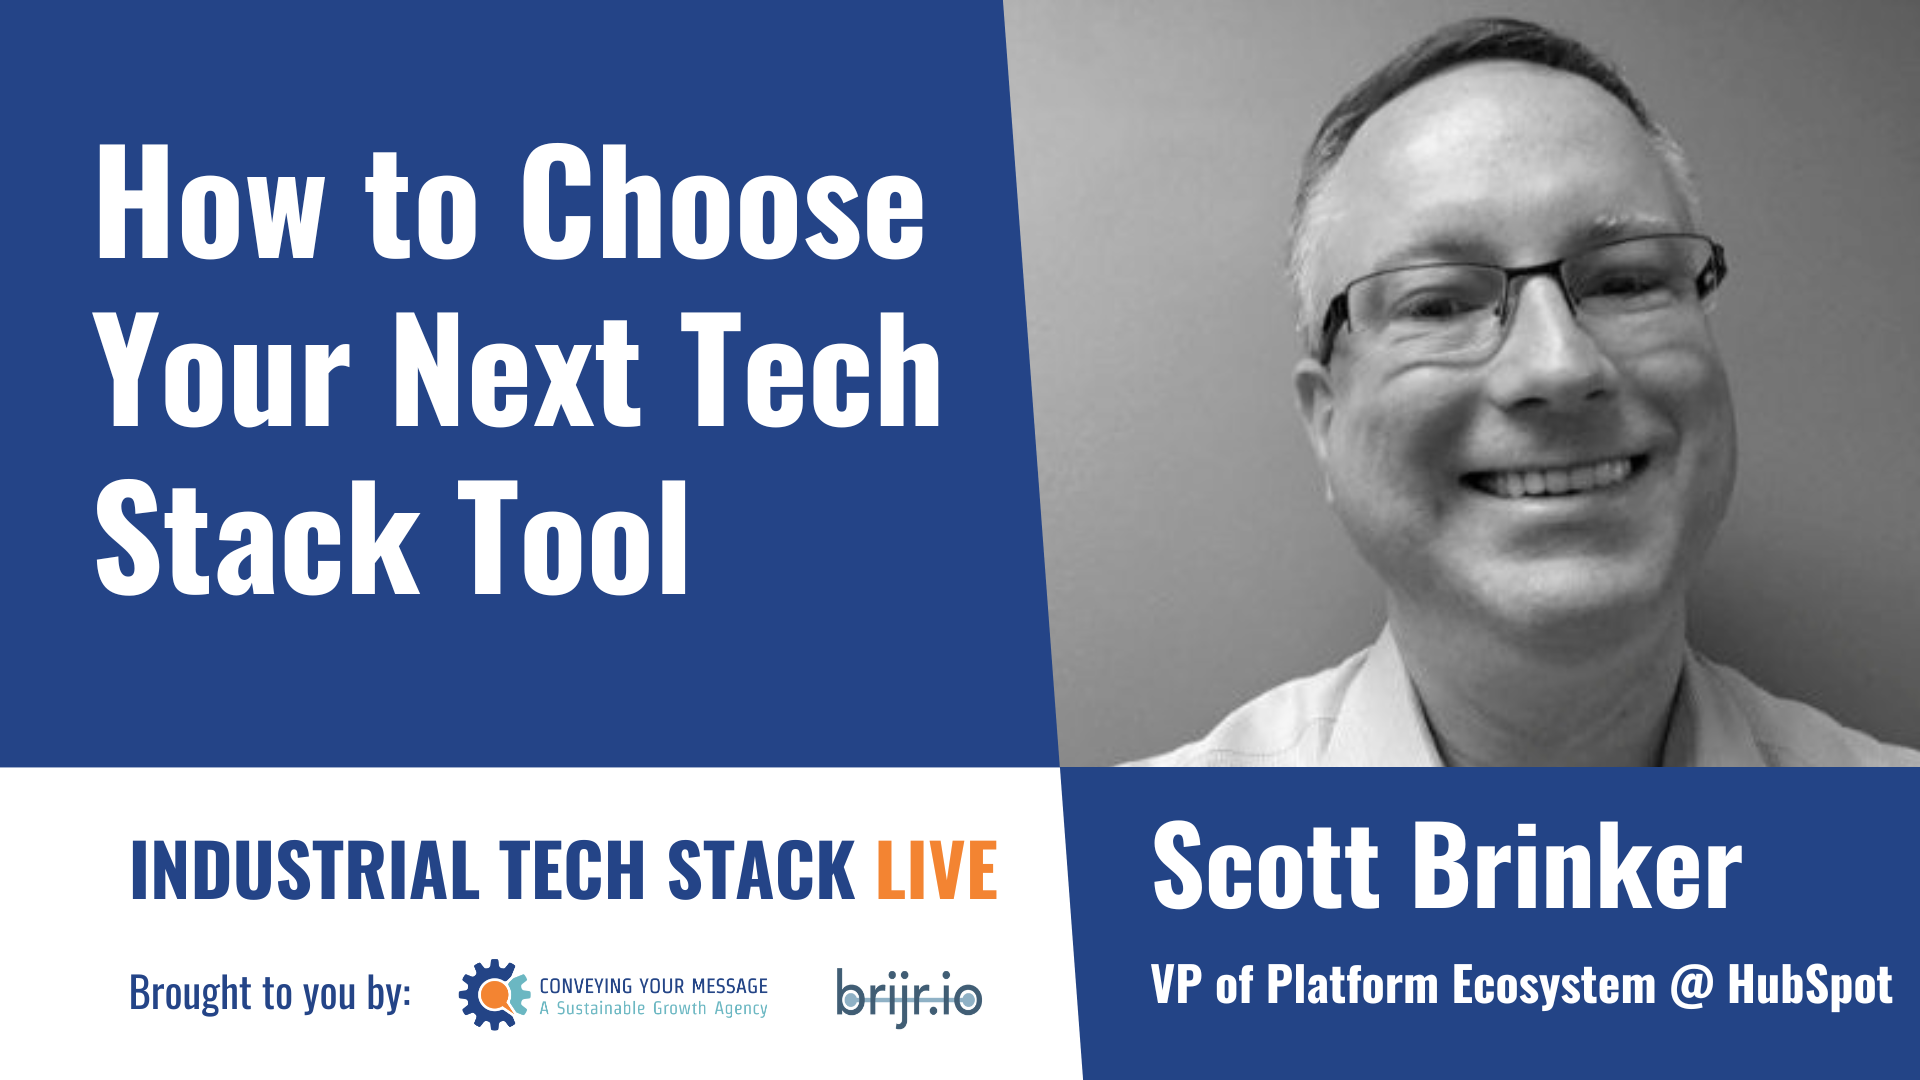 How to Choose Your Next Tech Stack Tool (Feat. Scott Brinker)